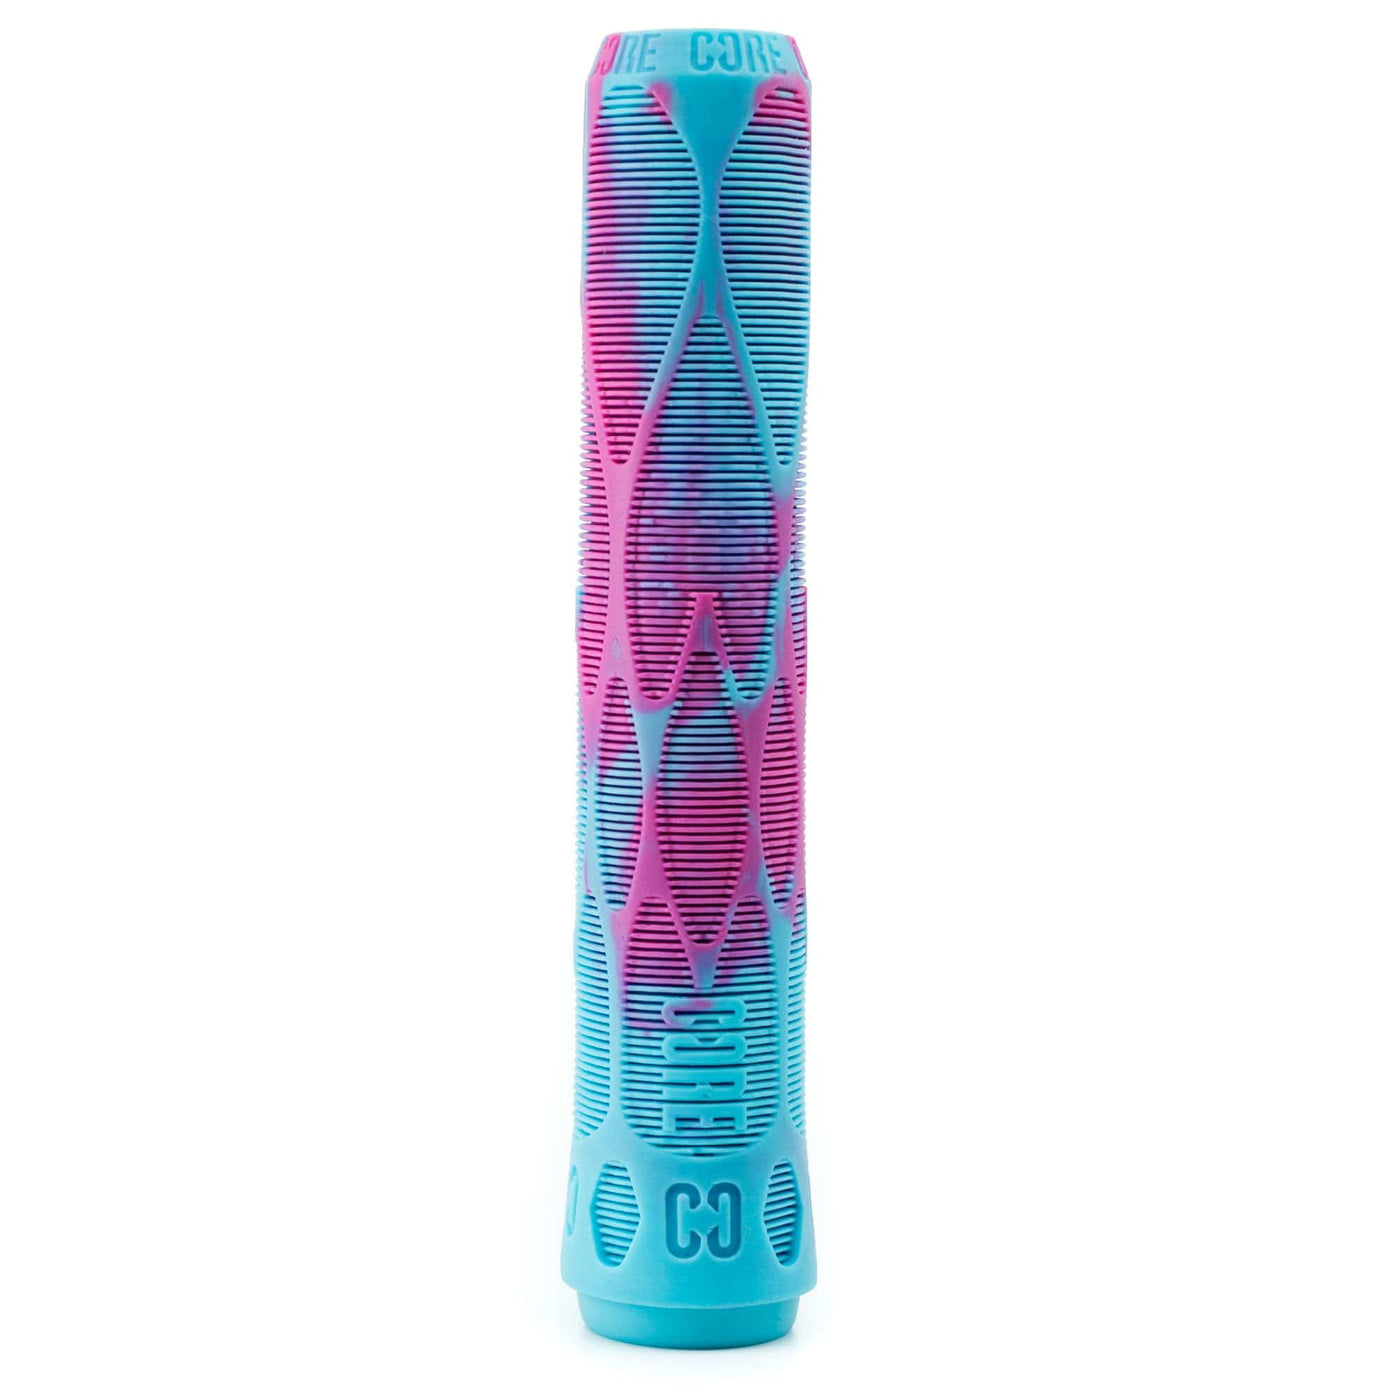 CORE Pro Scooter Handlebar Grips Soft 170mm Refresher Pink/Blue I Scooter Grips Standing Up